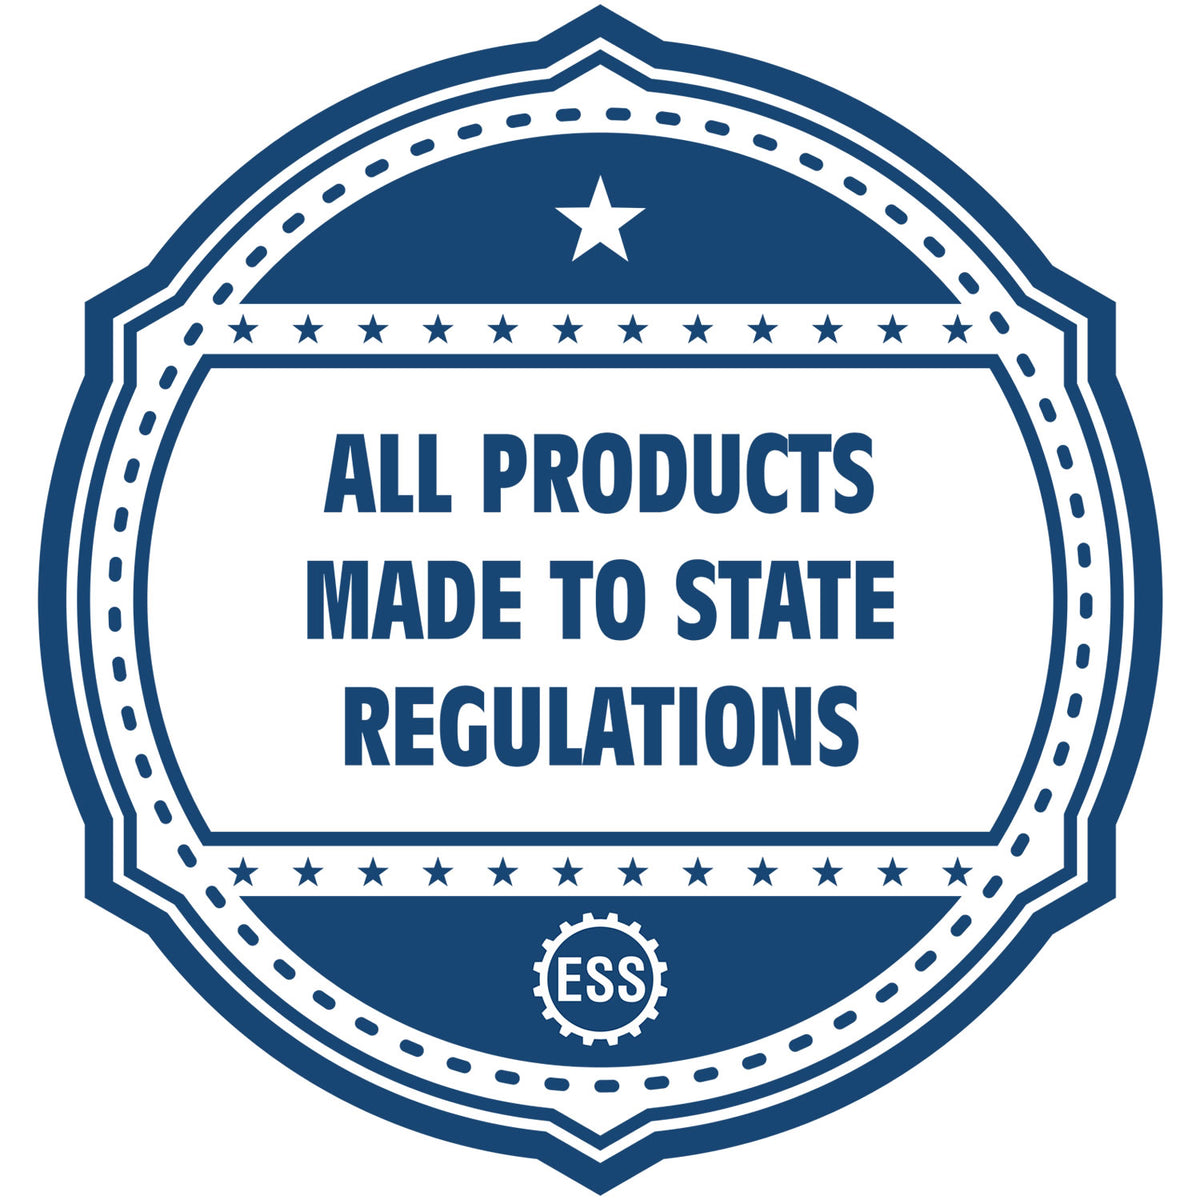 A blue icon or badge for the Hybrid Ohio Land Surveyor Seal showing that this product is made in compliance with state regulations.